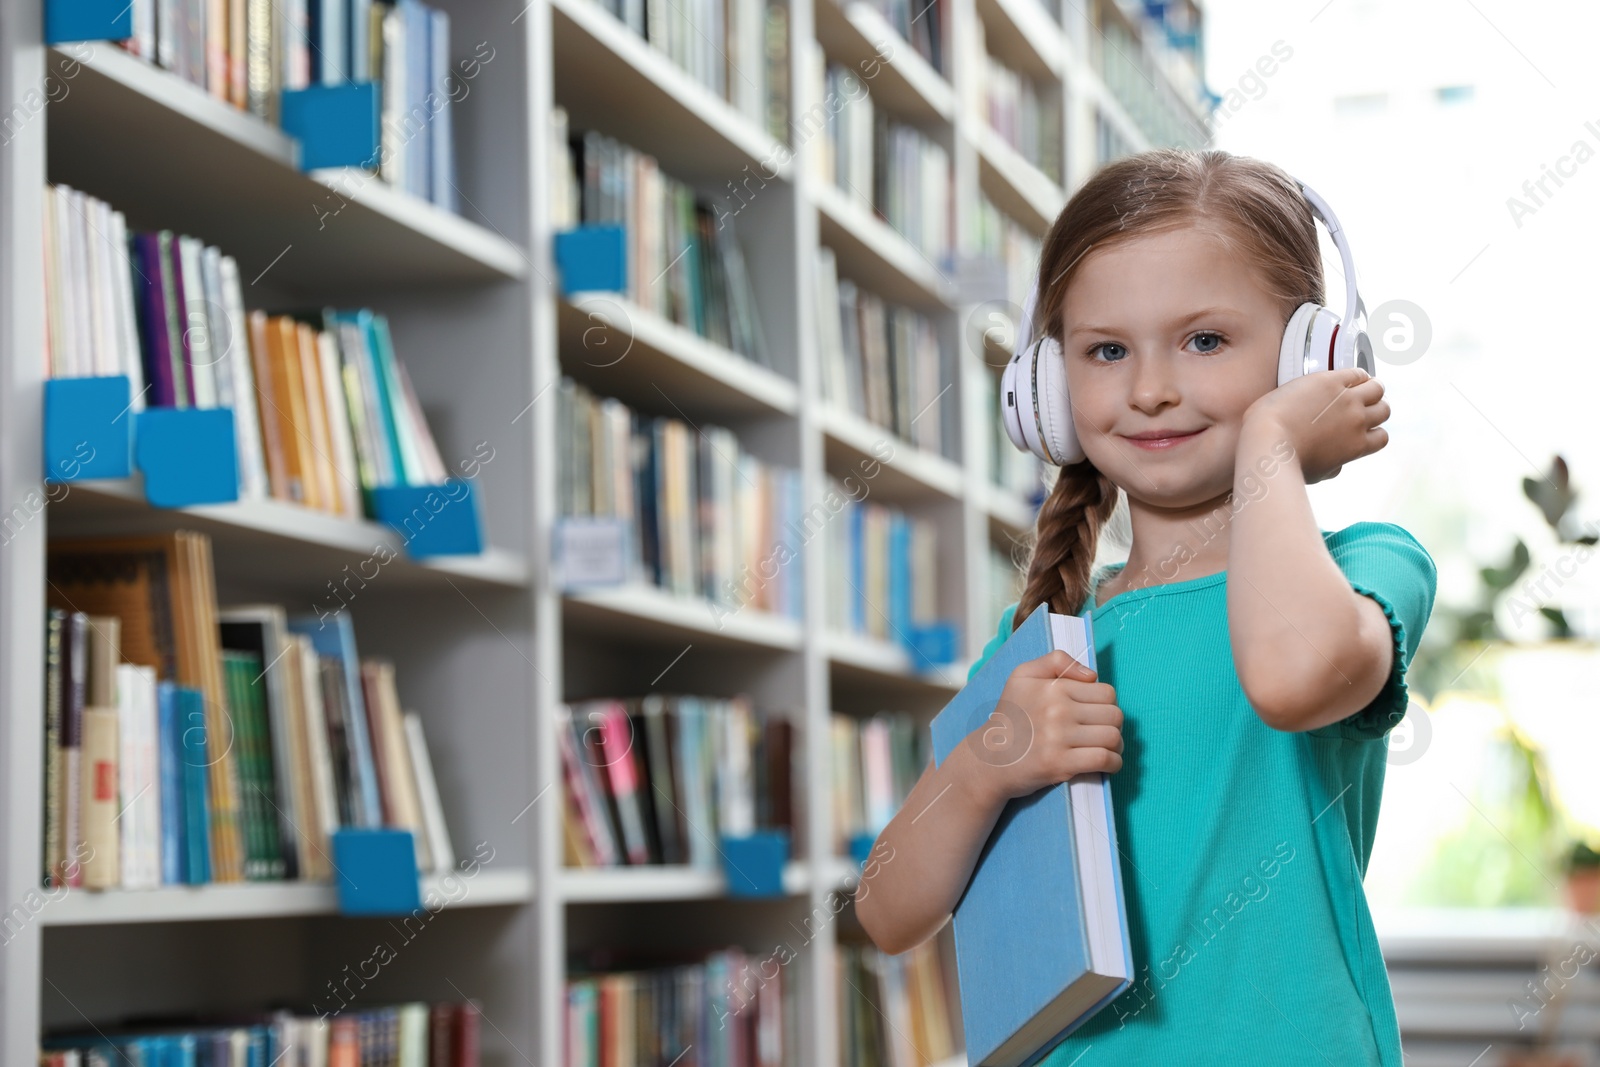 Photo of Cute little girl with headphones and book in library reading room